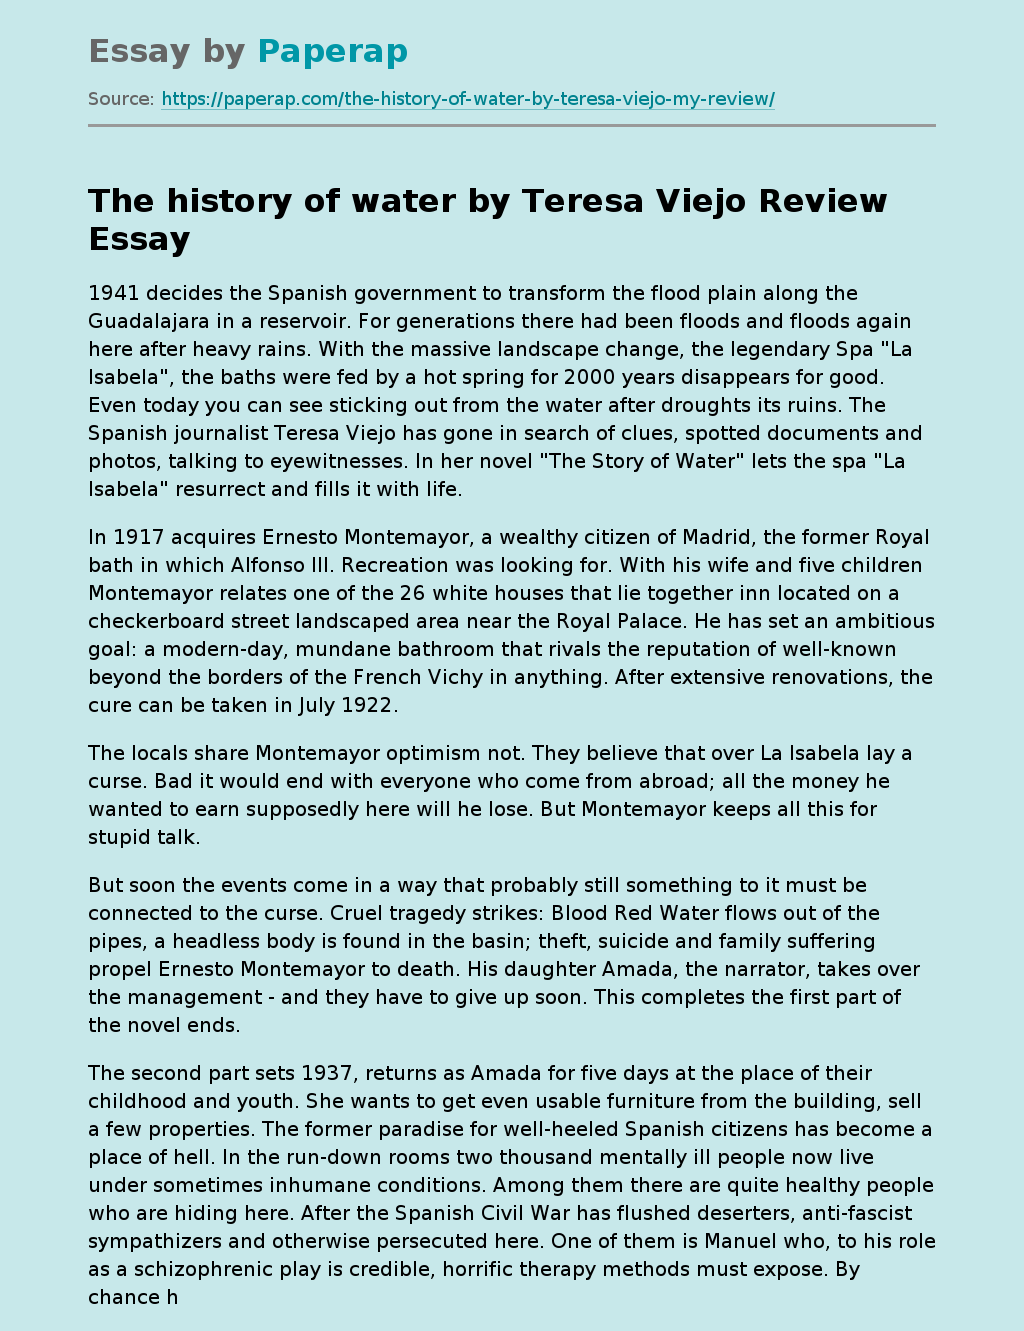 The history of water by Teresa Viejo Review